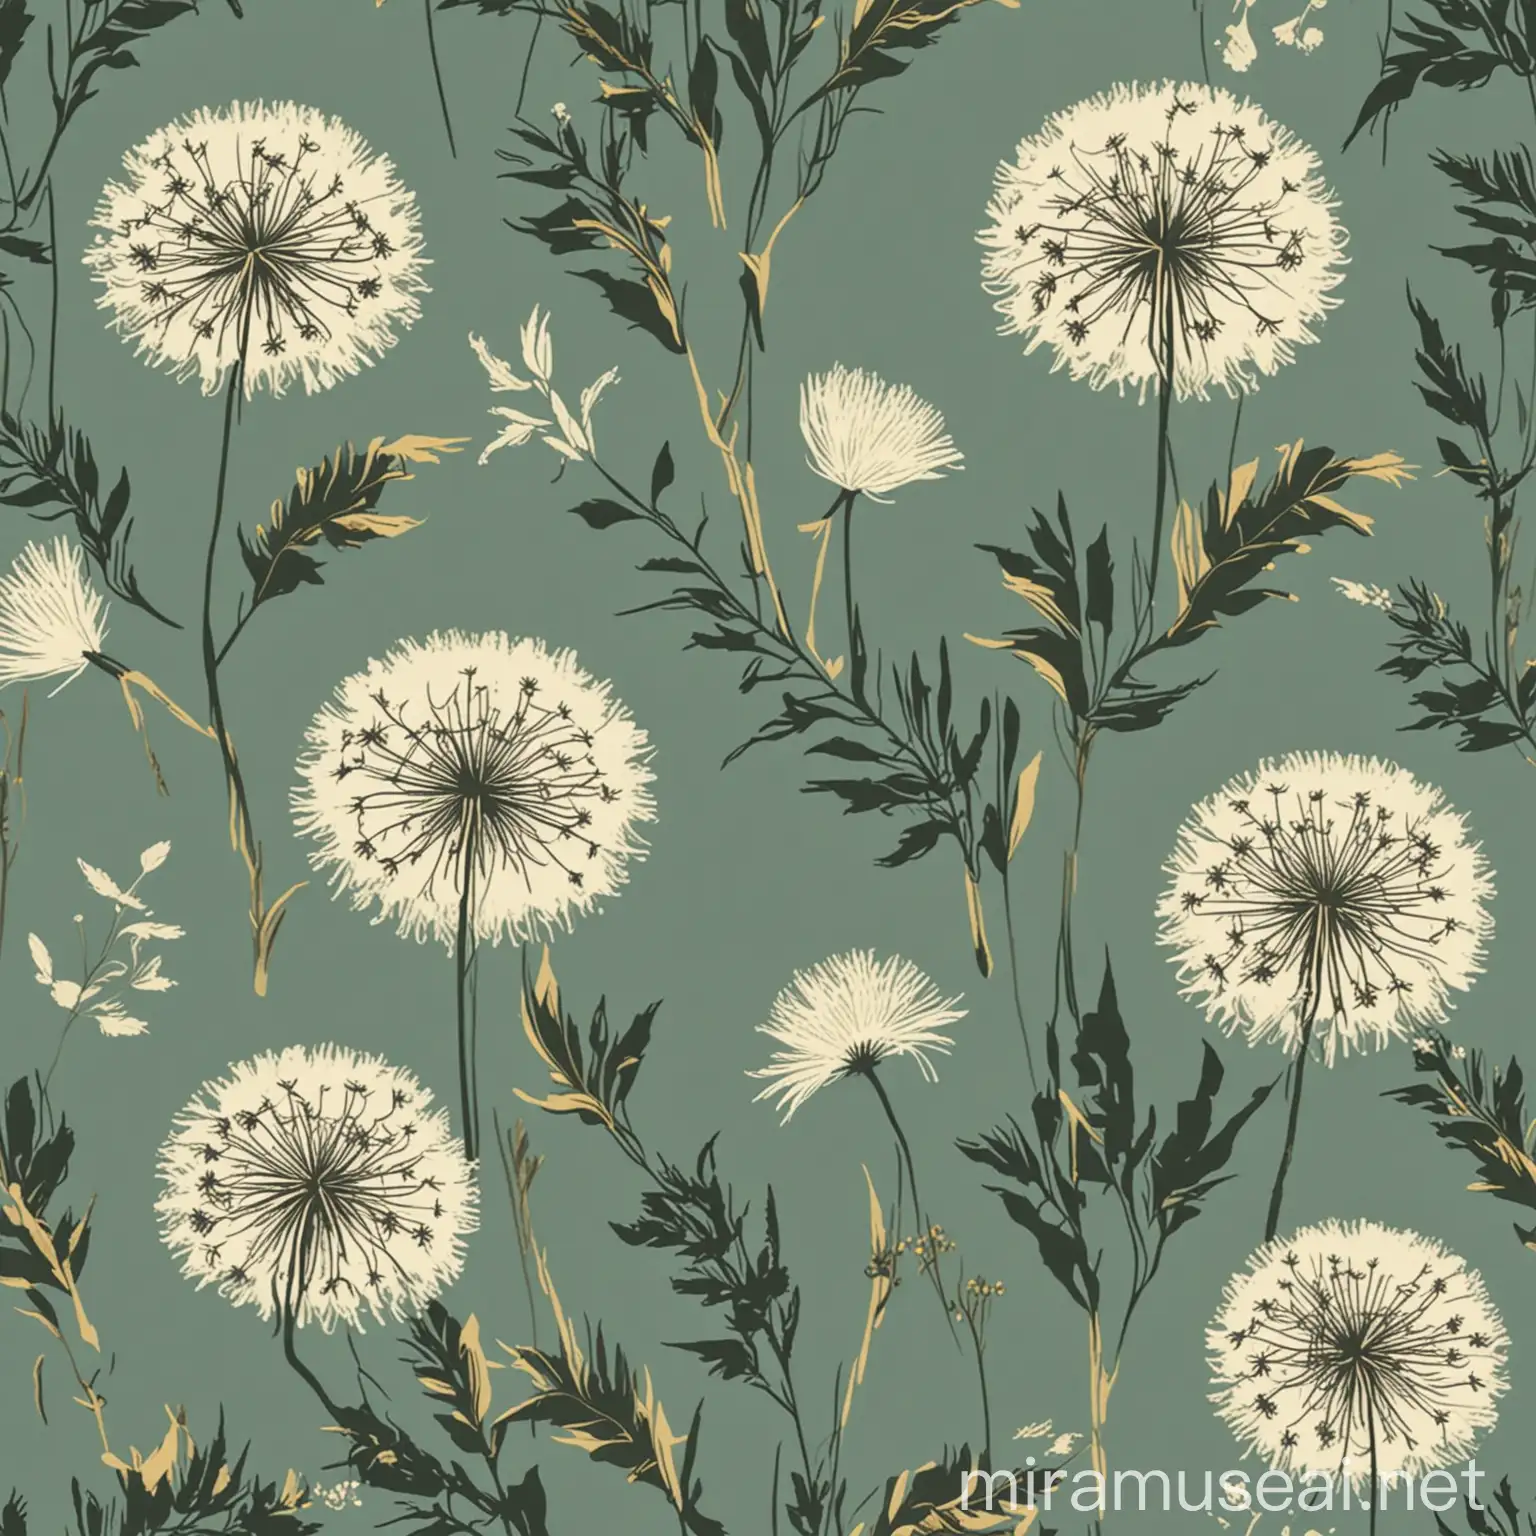 Minimalist Floral Seamless Pattern with Dandelions and Leaves